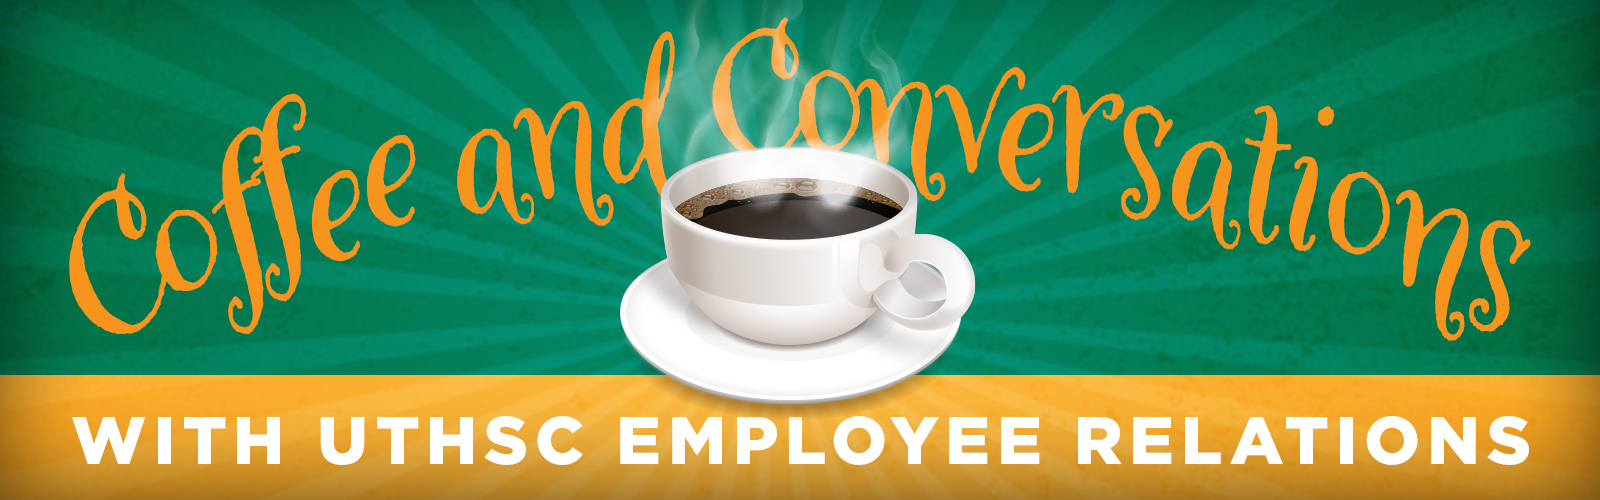 Coffee and Conversations with Employee Relations